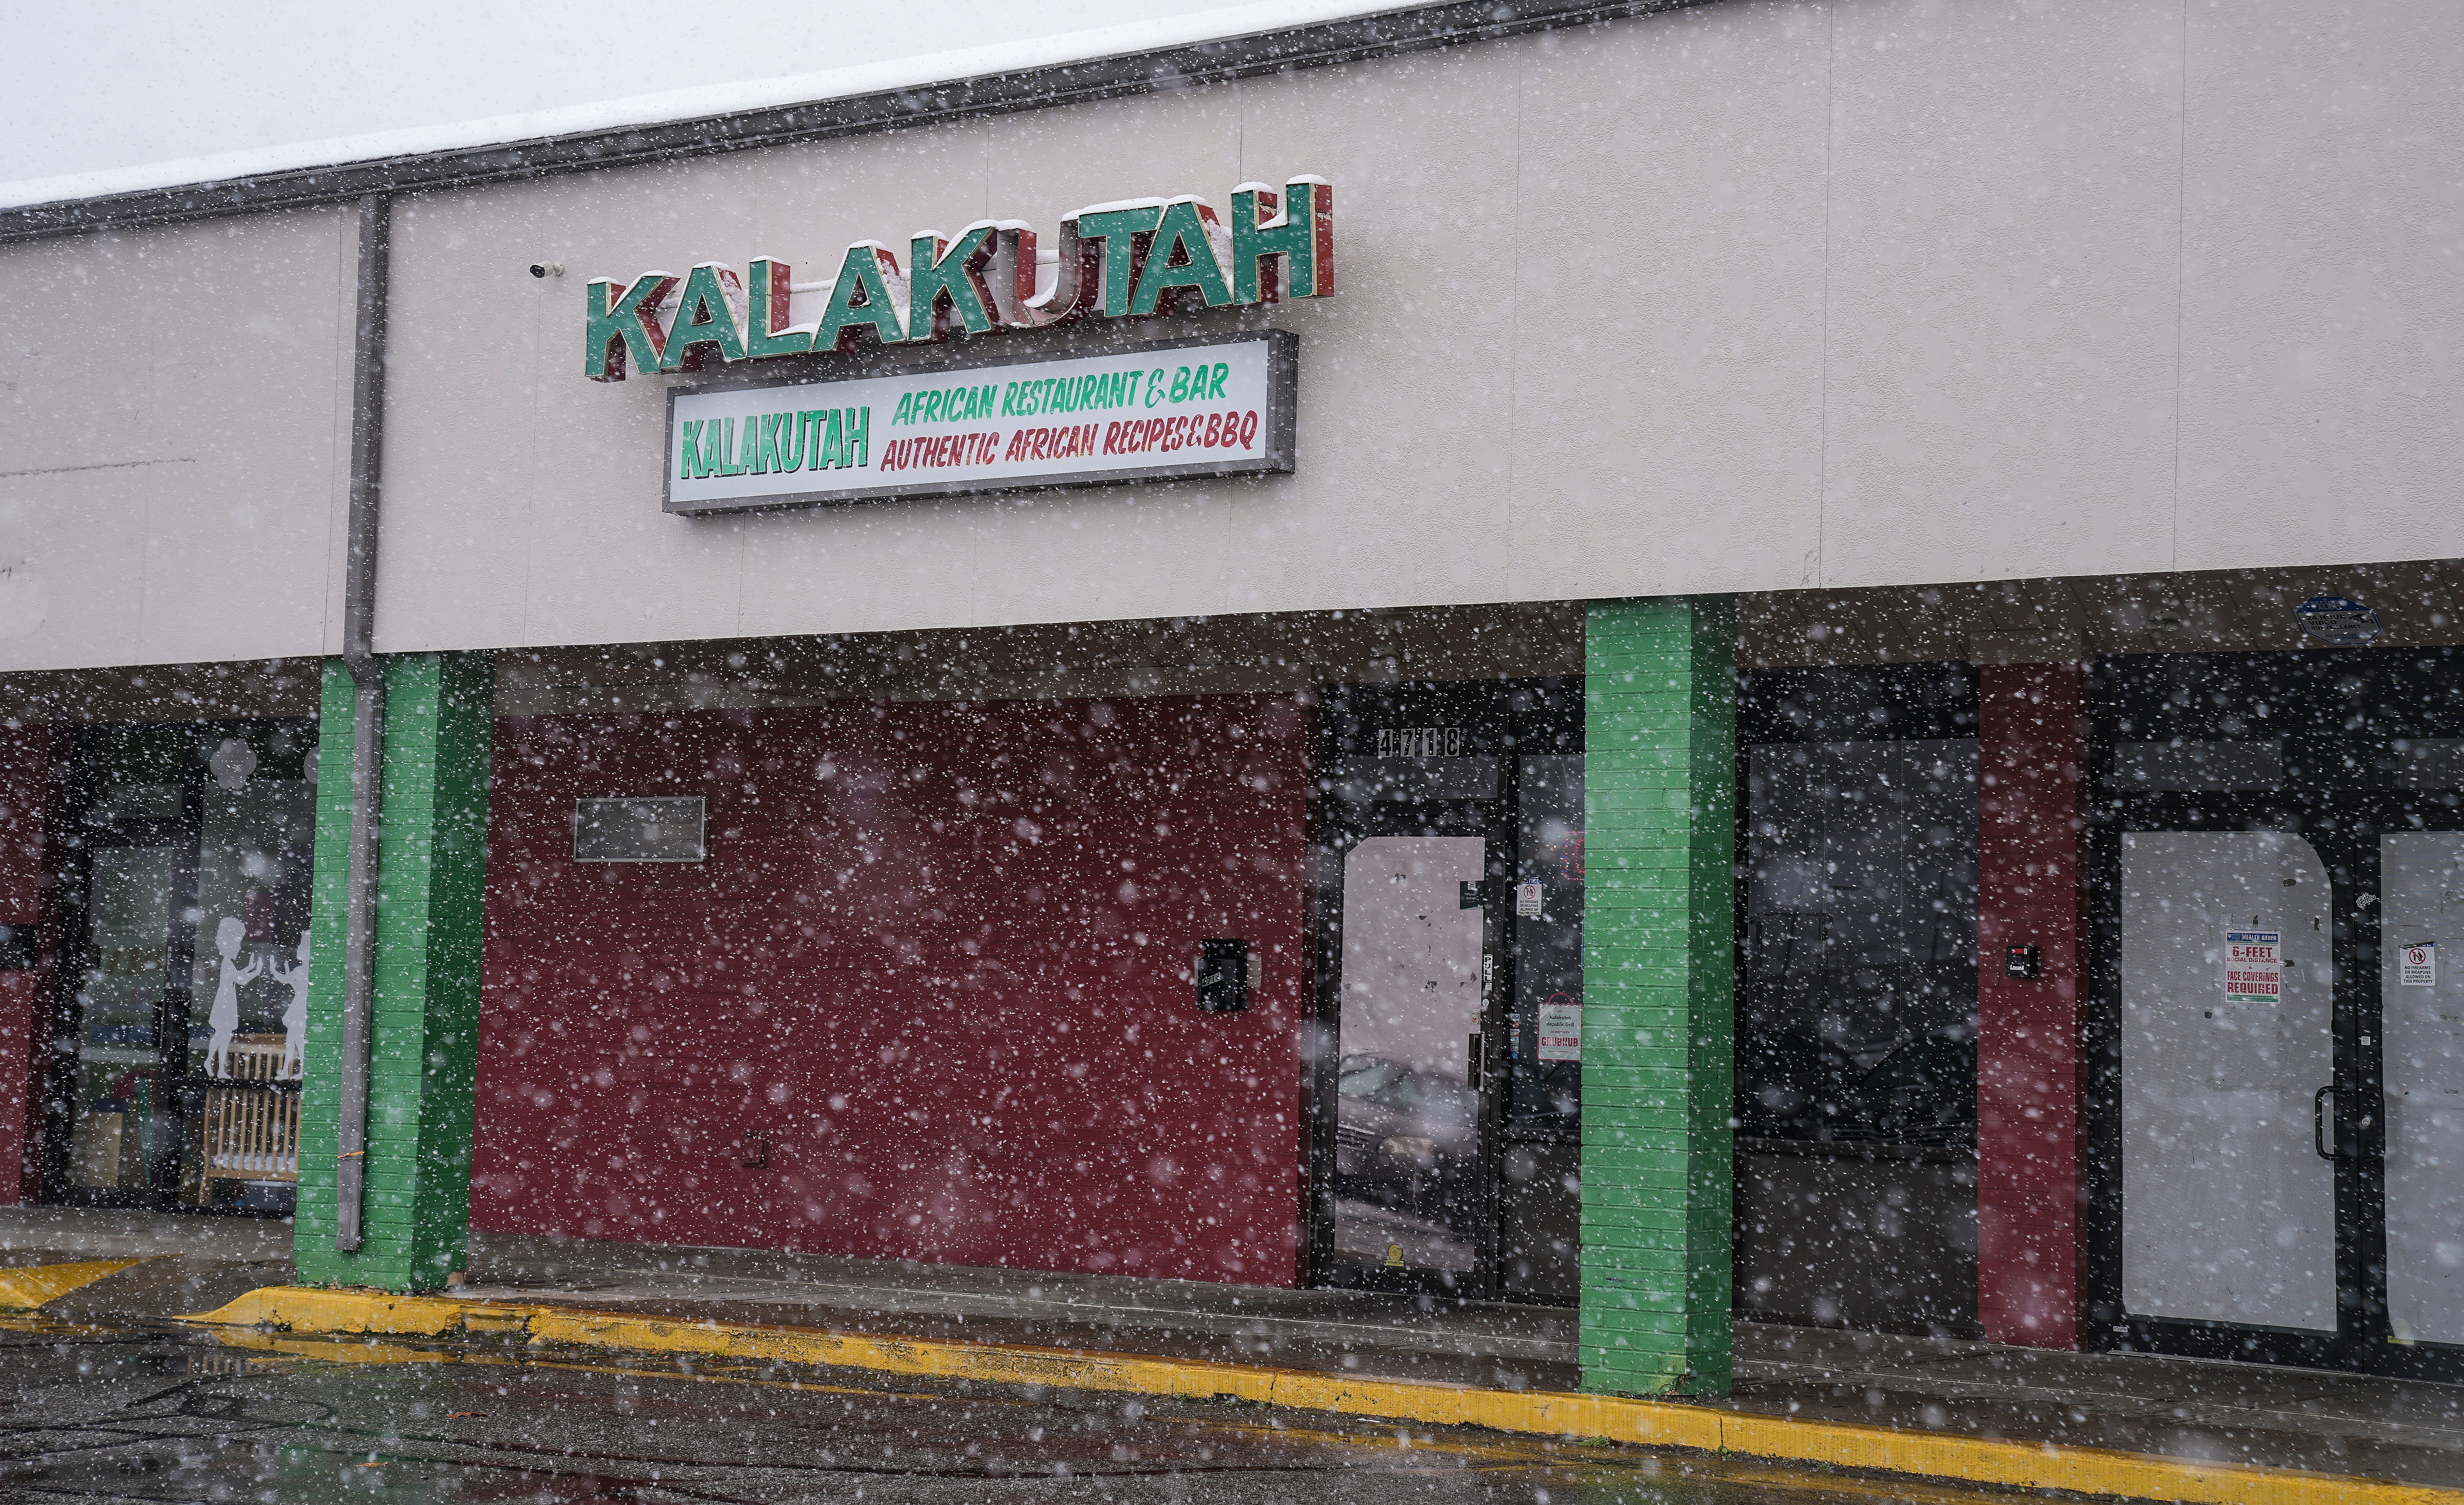 Police have made frequent runs to Club Kalakutah, including after a 25-year-old woman was fatally shot in February 2022.